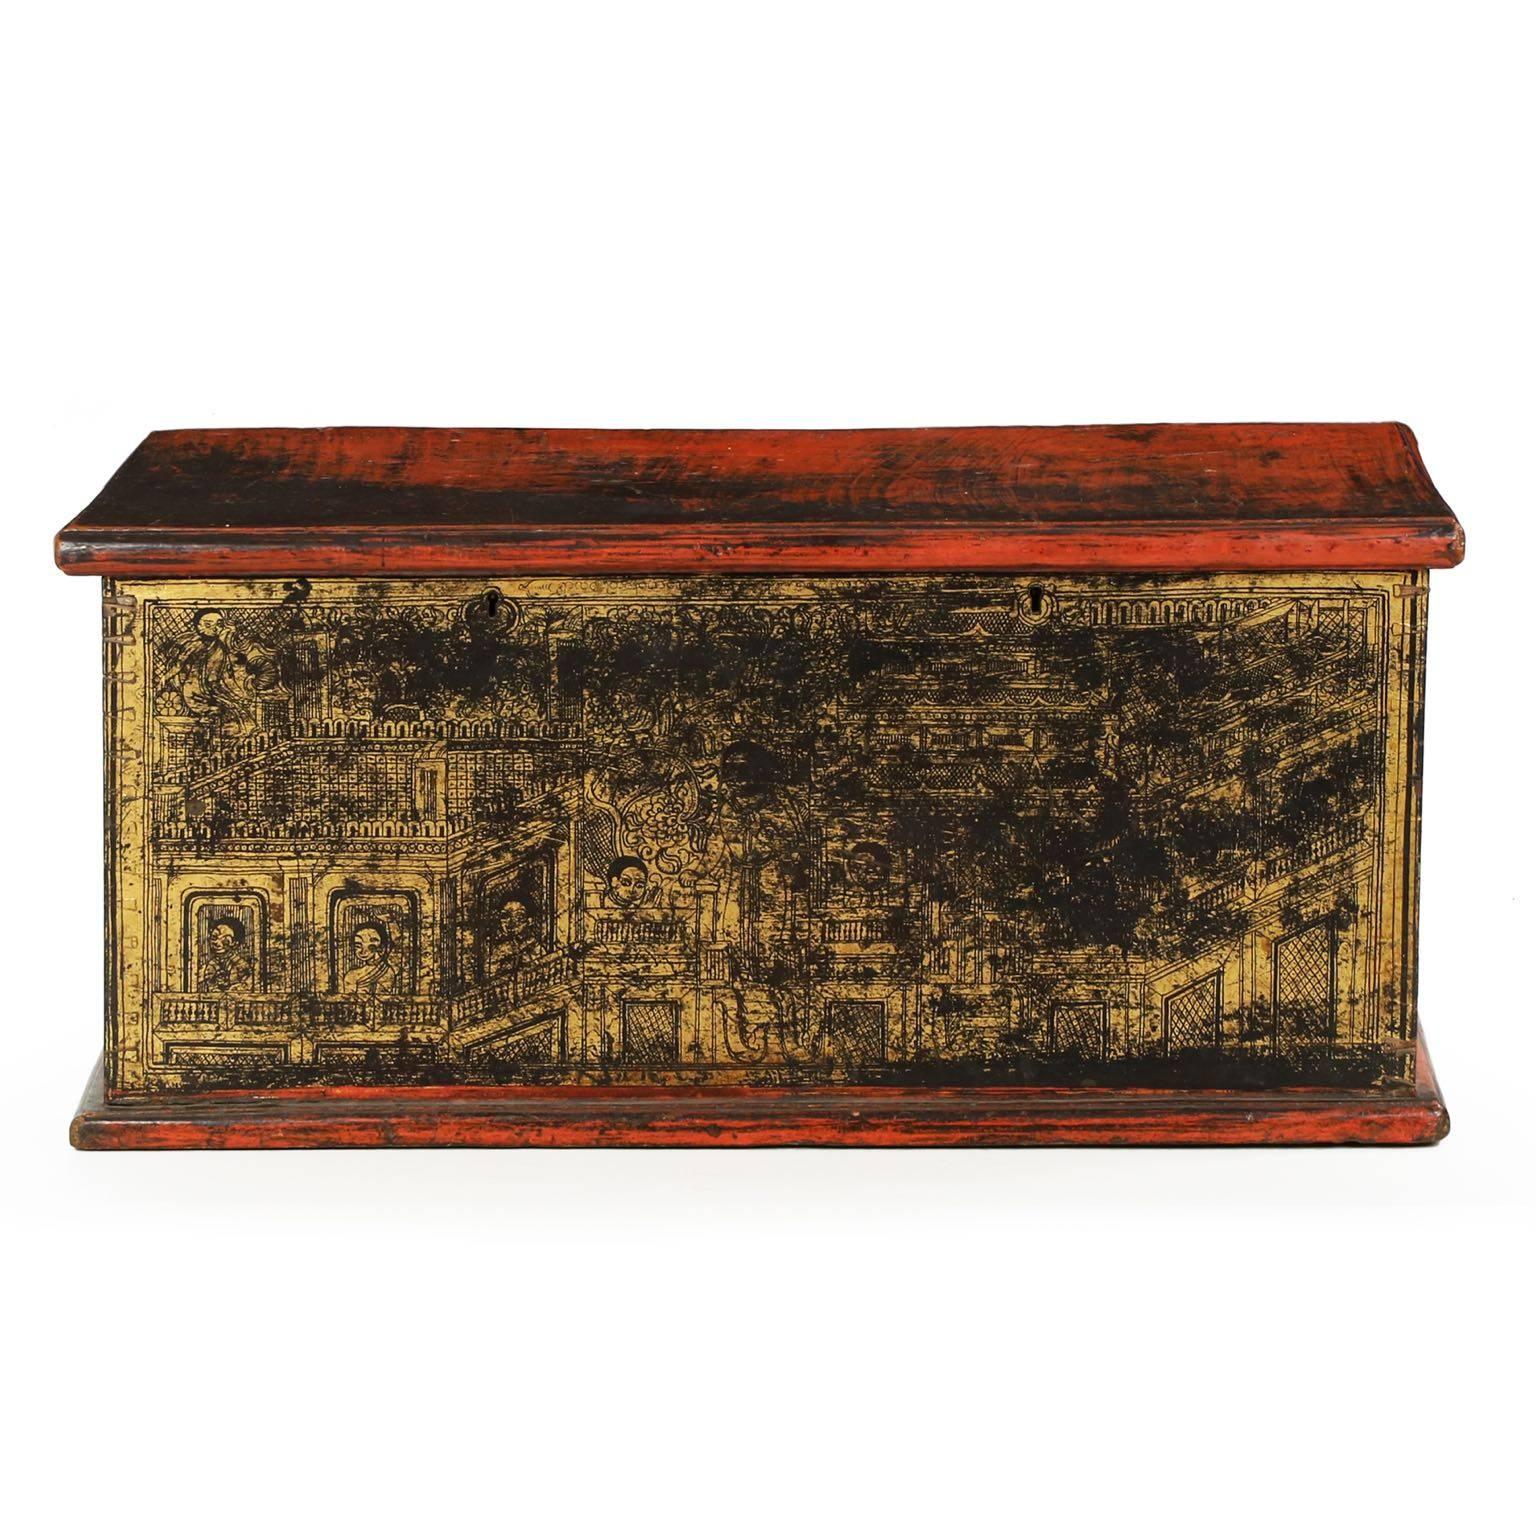 A very well preserved chest from the mid-to-late 19th century, the case is inordinately heavy with large open dovetails securing each corner of the chest beneath a red bole and the painted surface. Rather detailed, the ebonized ground is intricately